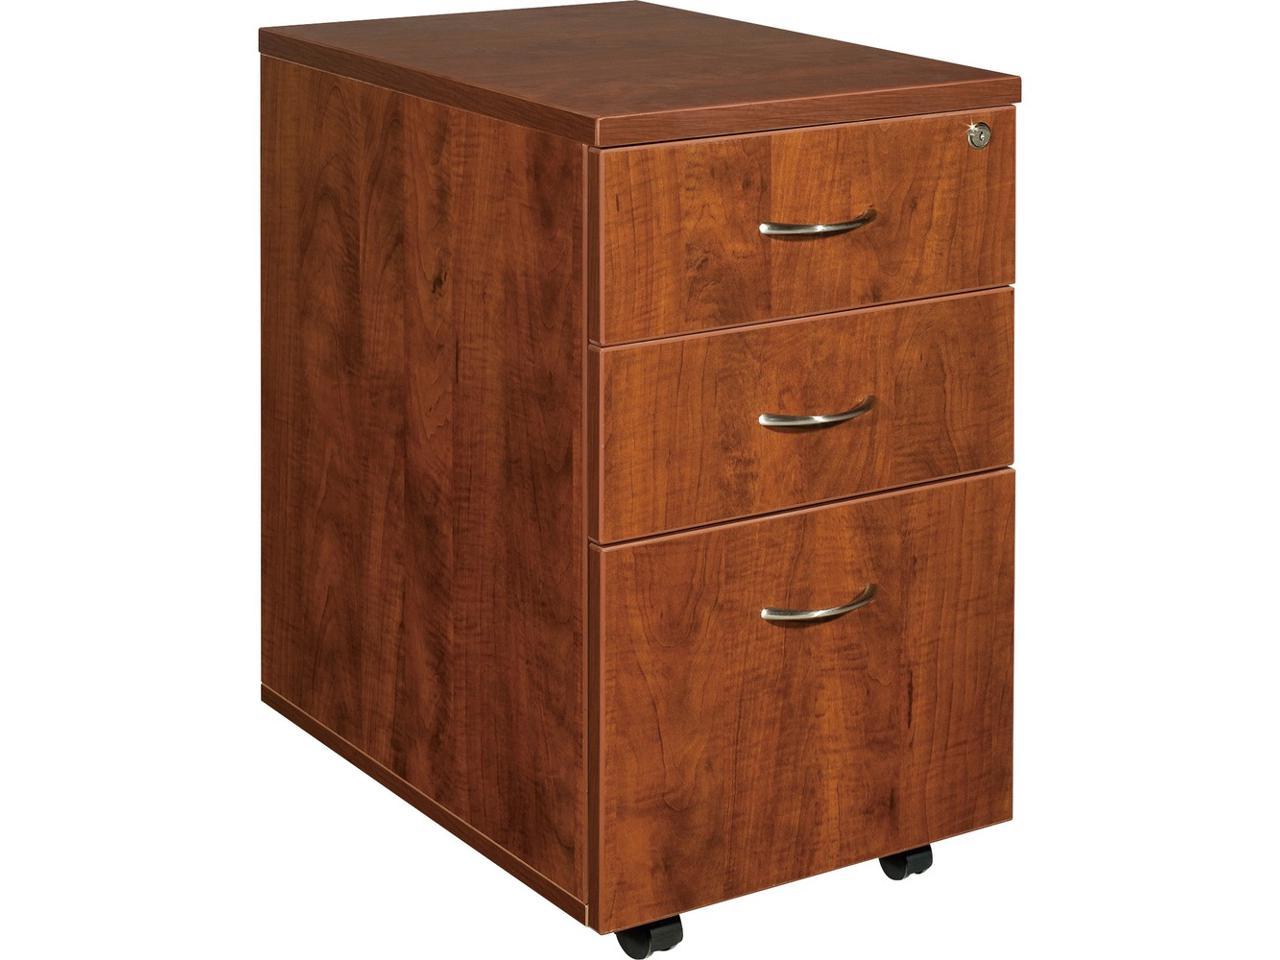 3 Drawers Vertical Wood Composite Lockable Filing Cabinet, Cherry - image 5 of 10